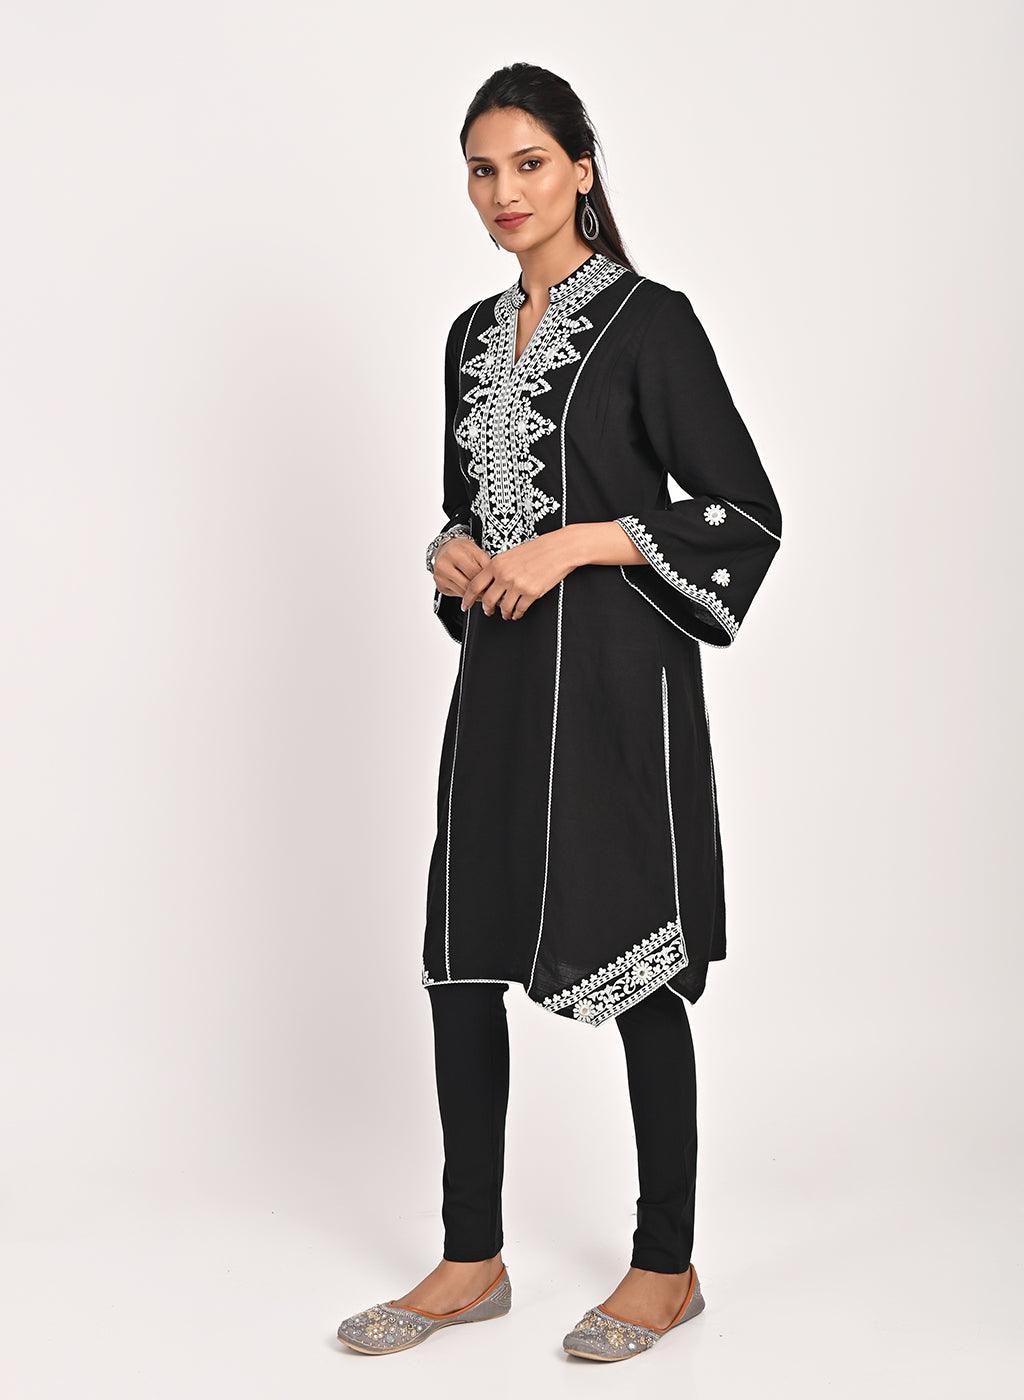 Black Mid-length Cotton Kurti for Women with Embroidery - Lakshita